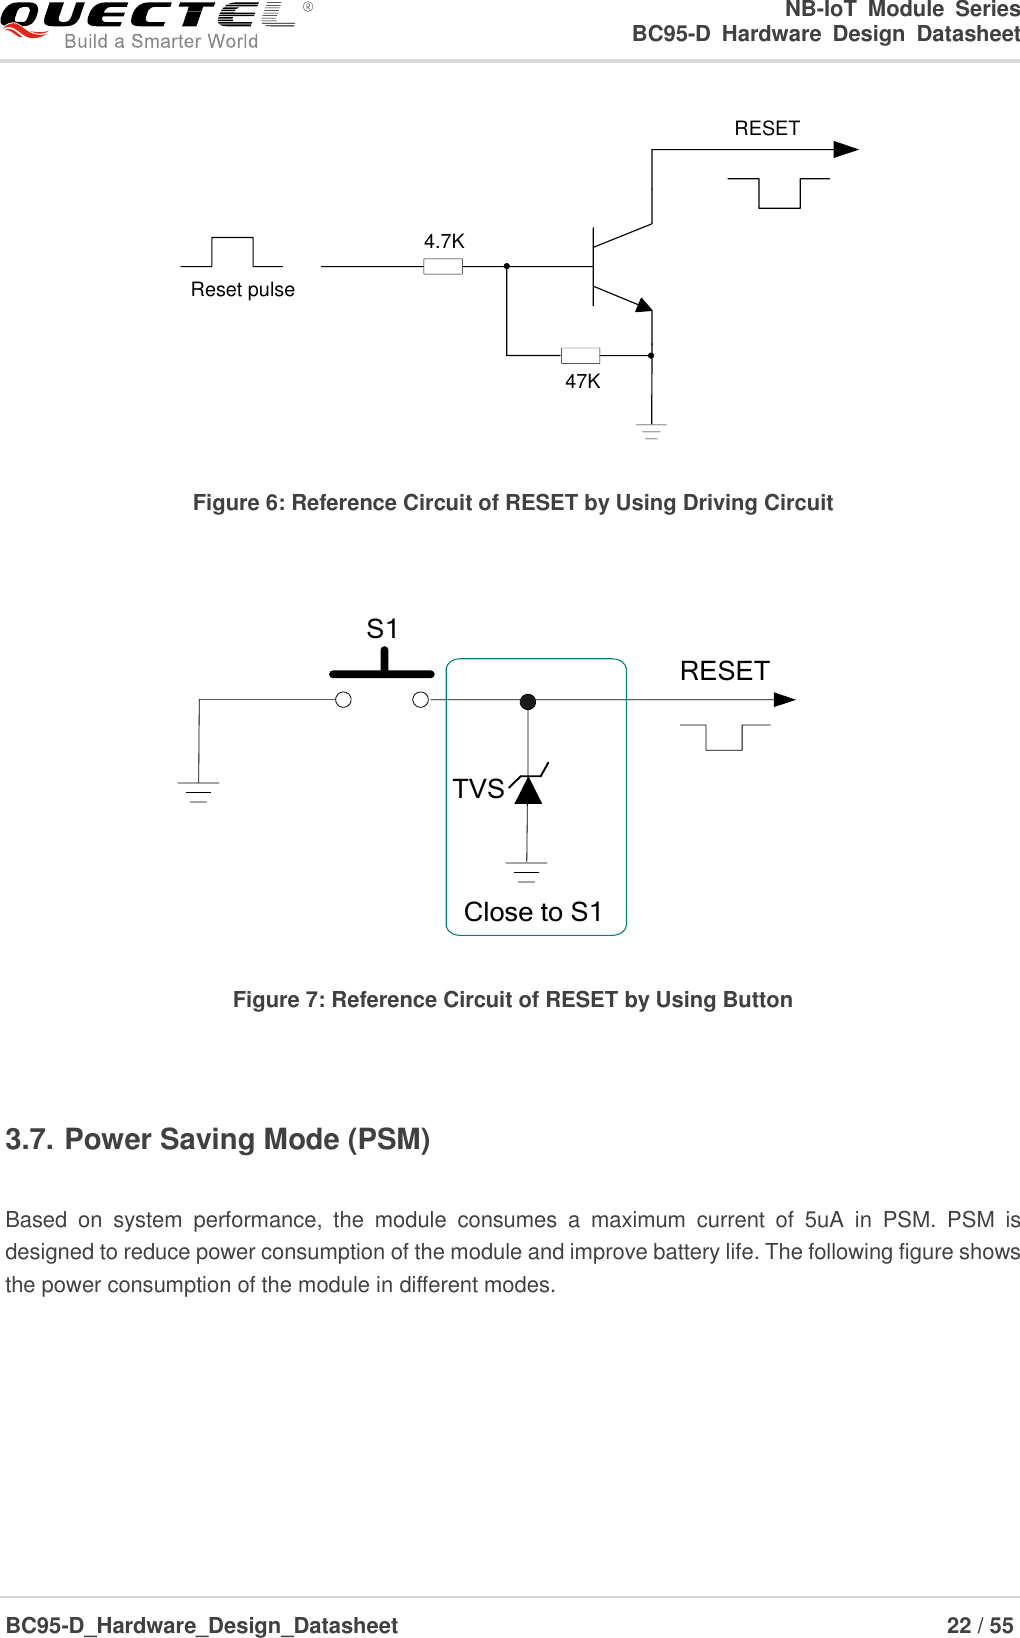                                                            NB-IoT  Module  Series                                                          BC95-D  Hardware  Design  Datasheet BC95-D_Hardware_Design_Datasheet                                                                    22 / 55    Reset pulseRESET4.7K47K Figure 6: Reference Circuit of RESET by Using Driving Circuit  RESETS1Close to S1TVS Figure 7: Reference Circuit of RESET by Using Button  3.7. Power Saving Mode (PSM)  Based  on  system  performance,  the  module  consumes  a  maximum  current  of  5uA  in  PSM.  PSM  is designed to reduce power consumption of the module and improve battery life. The following figure shows the power consumption of the module in different modes.   